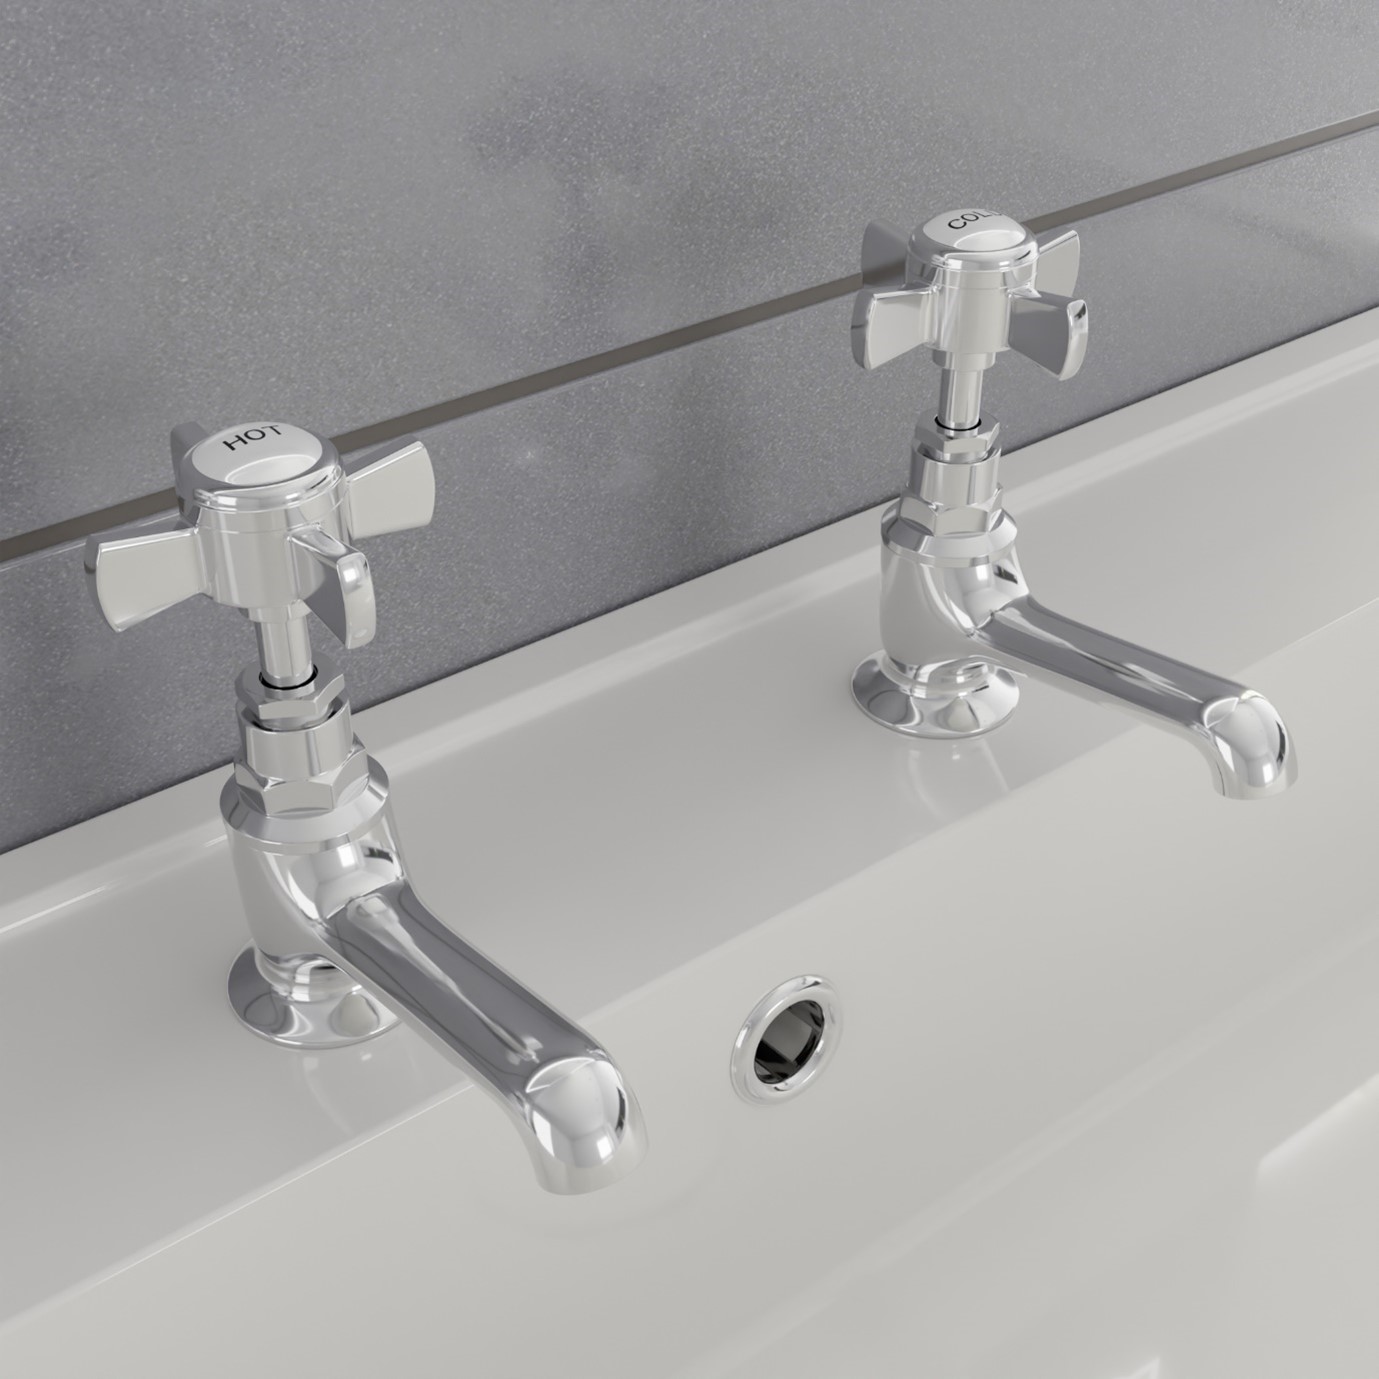 Traditional Basin Pillar Taps for Hot and Cold Water